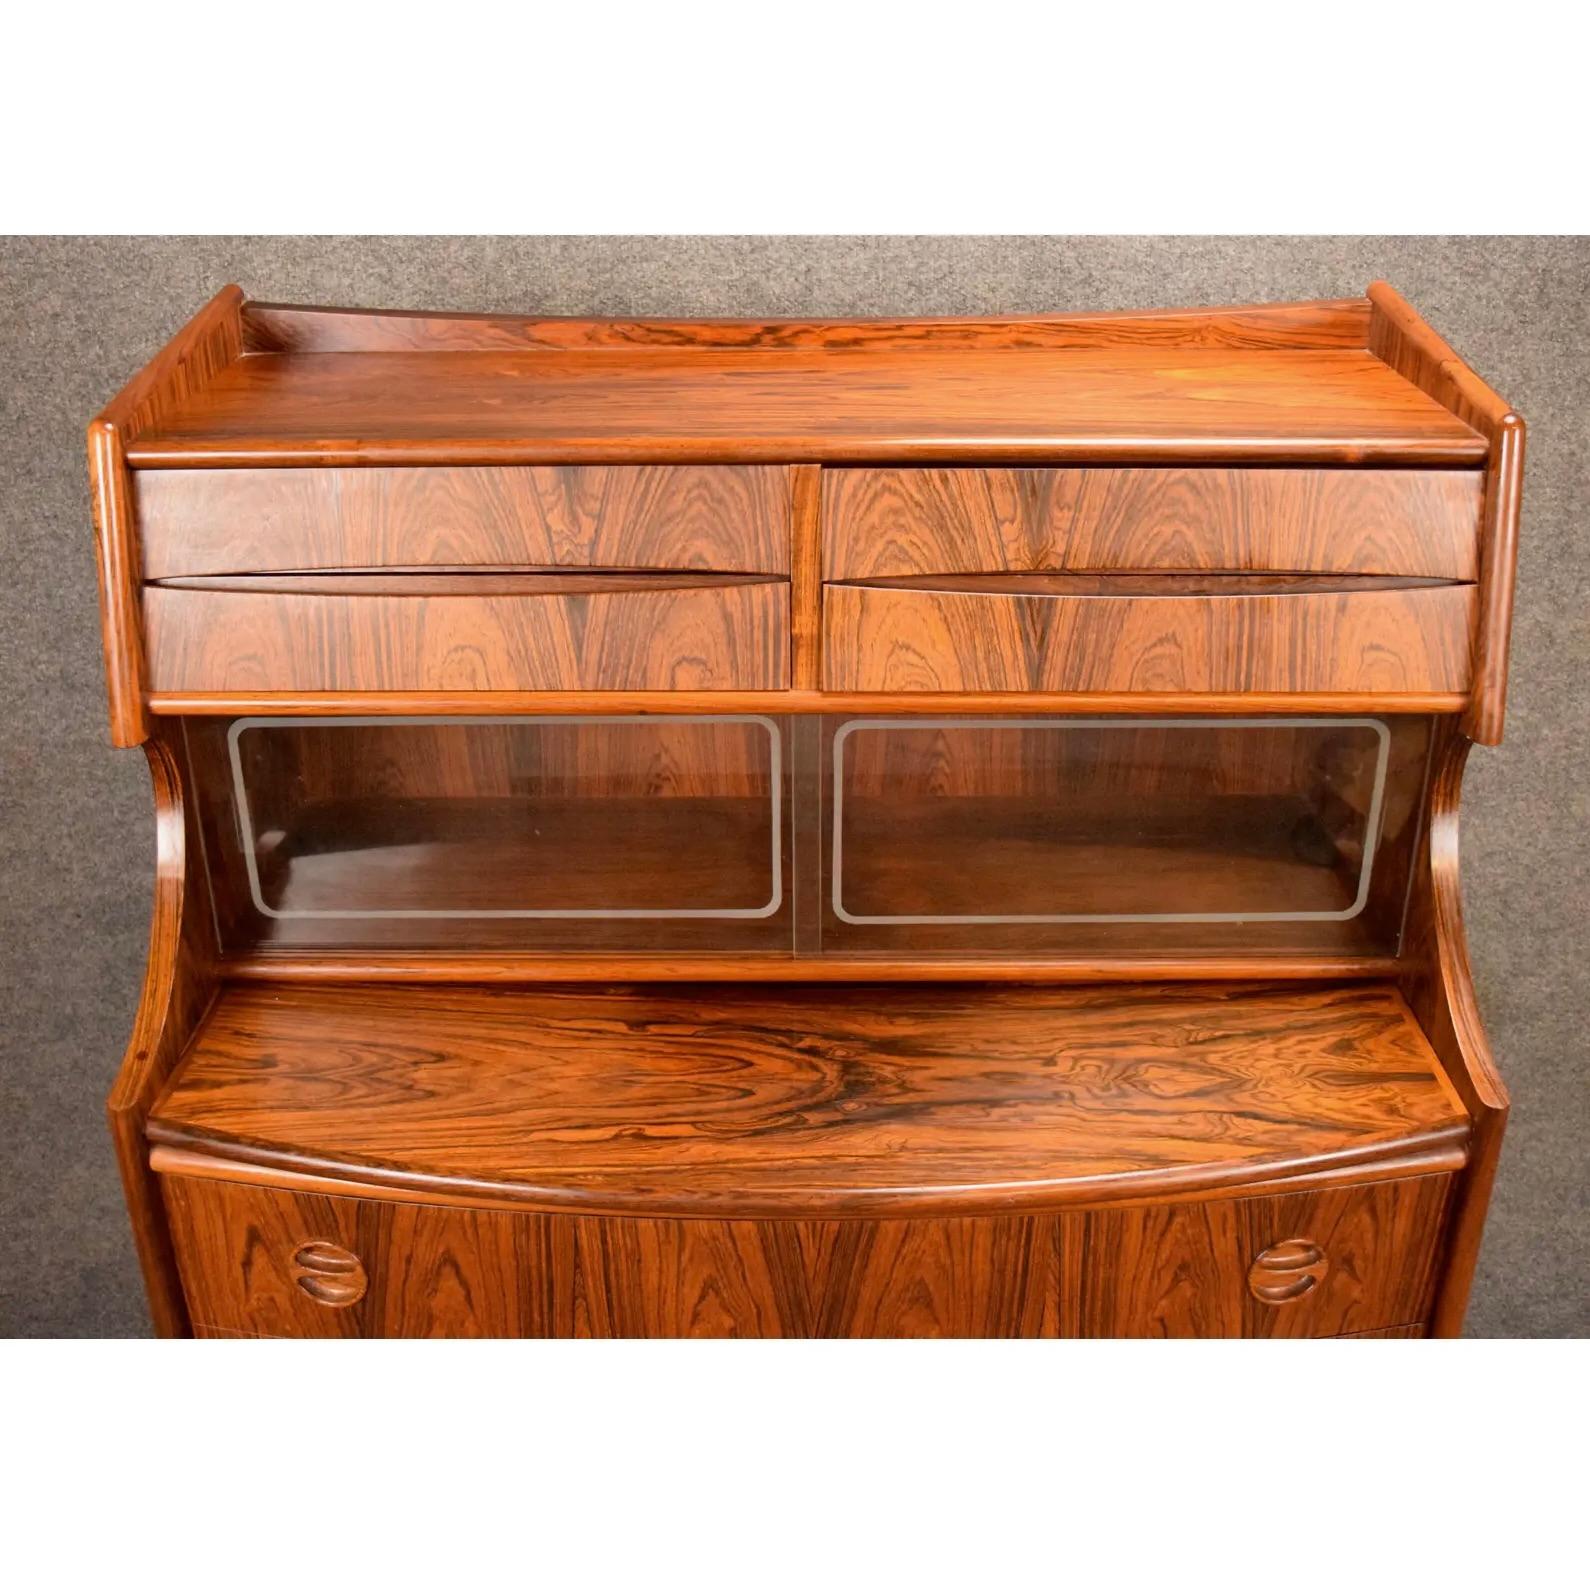 Here is a beautiful scandinavian modern secretary desk in rosewood manufactured by Falsig Mobler in Denmark in the 1960's. This special case piece, recently imported from Europe to California, features a vibrant wood grain, four small drawers, a